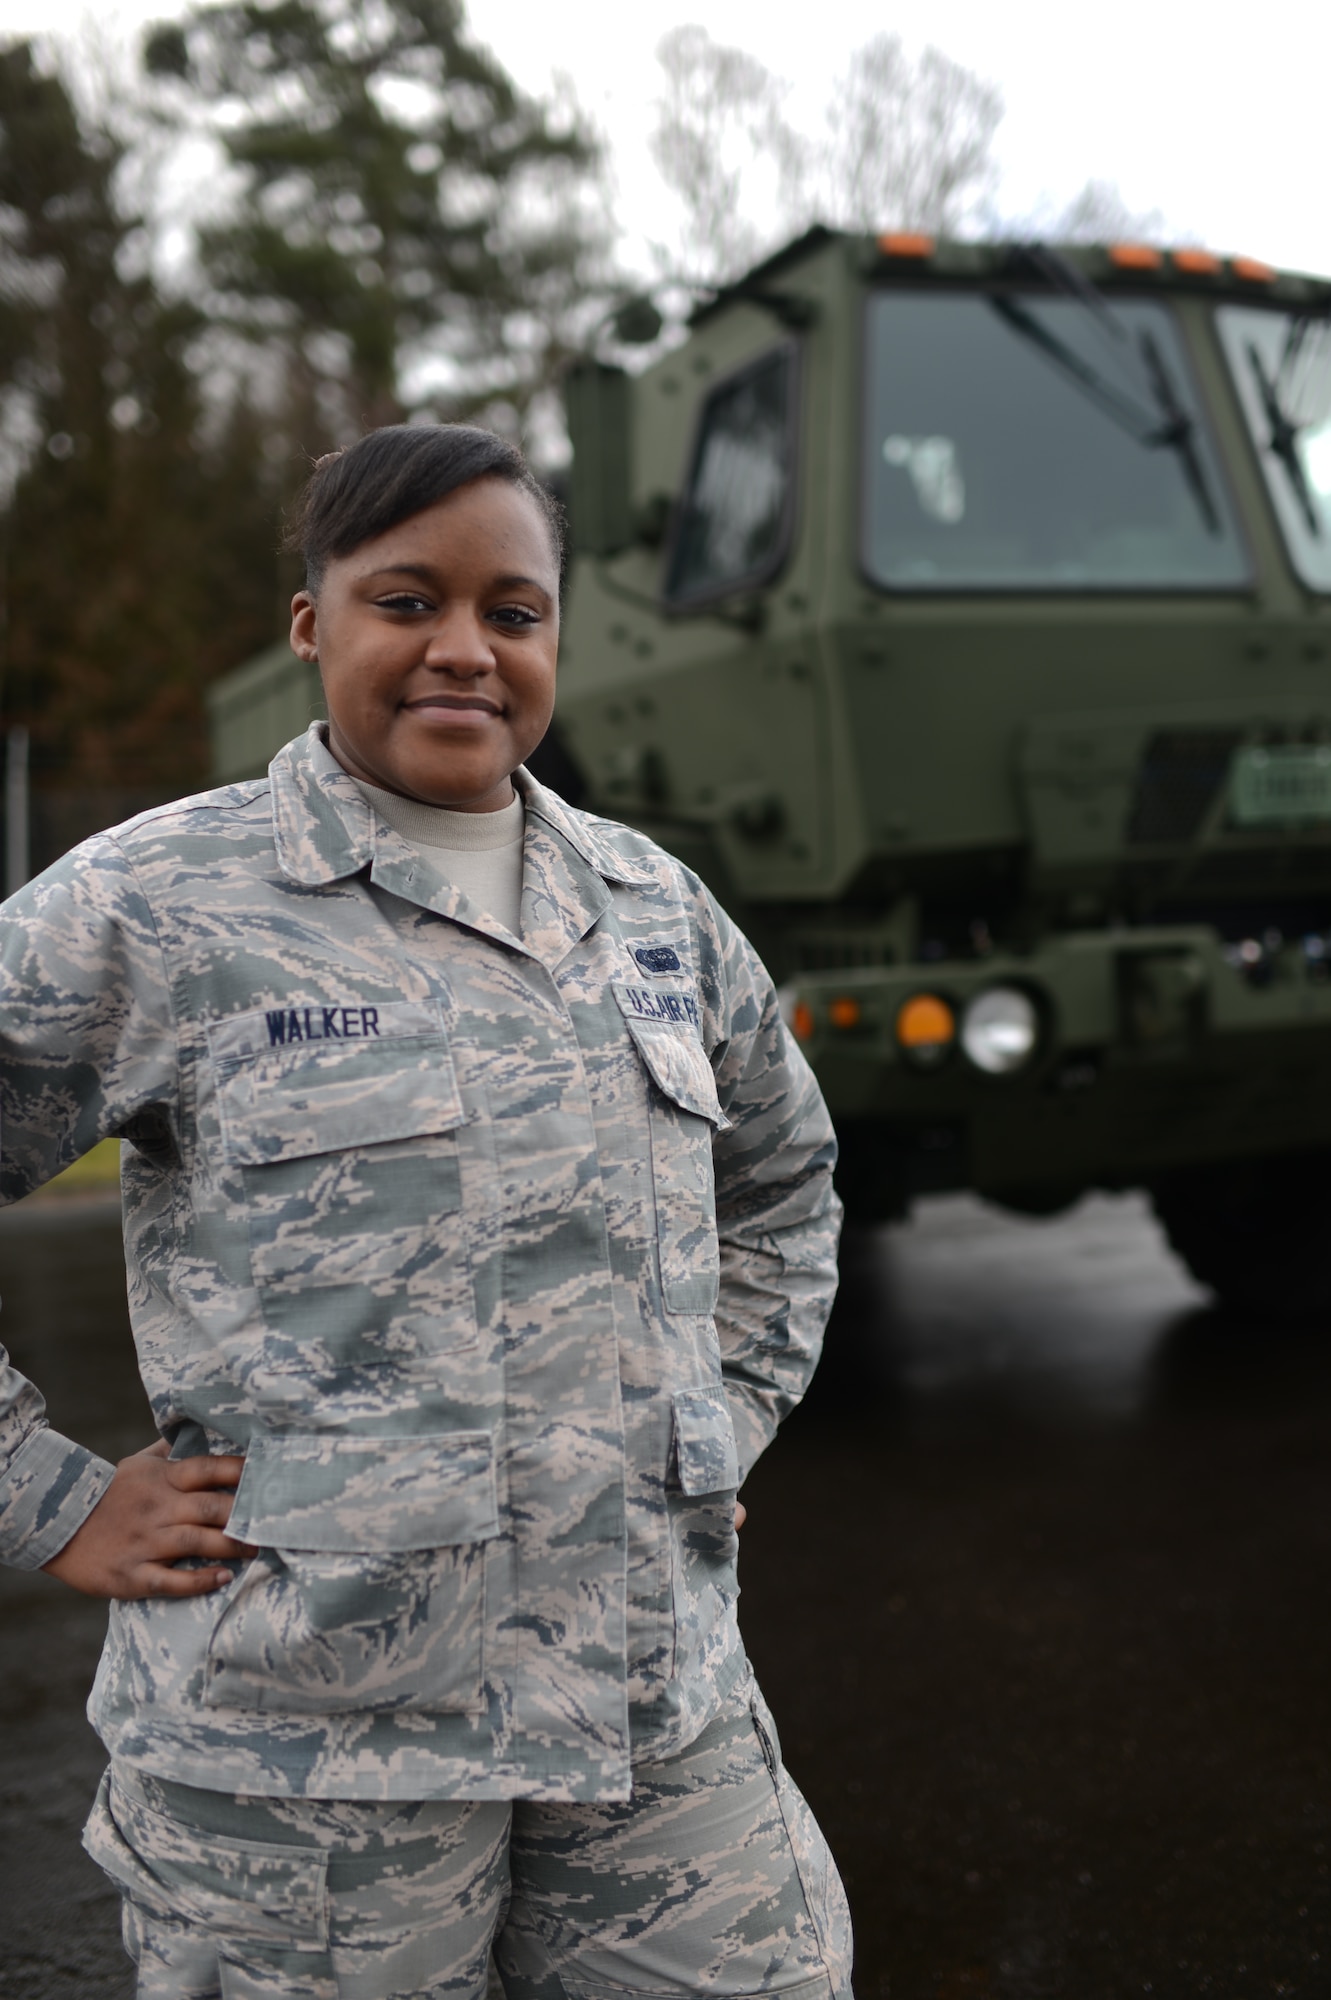 U.S. Air Force Airman 1st Class Kathryn E. Walker, 606th Air Control Squadron knowledge operator, is the Super Saber Performer for the week of March 20-26, 2014. (U.S. Air Force photo by Senior Airman Gustavo Castillo/Released)
